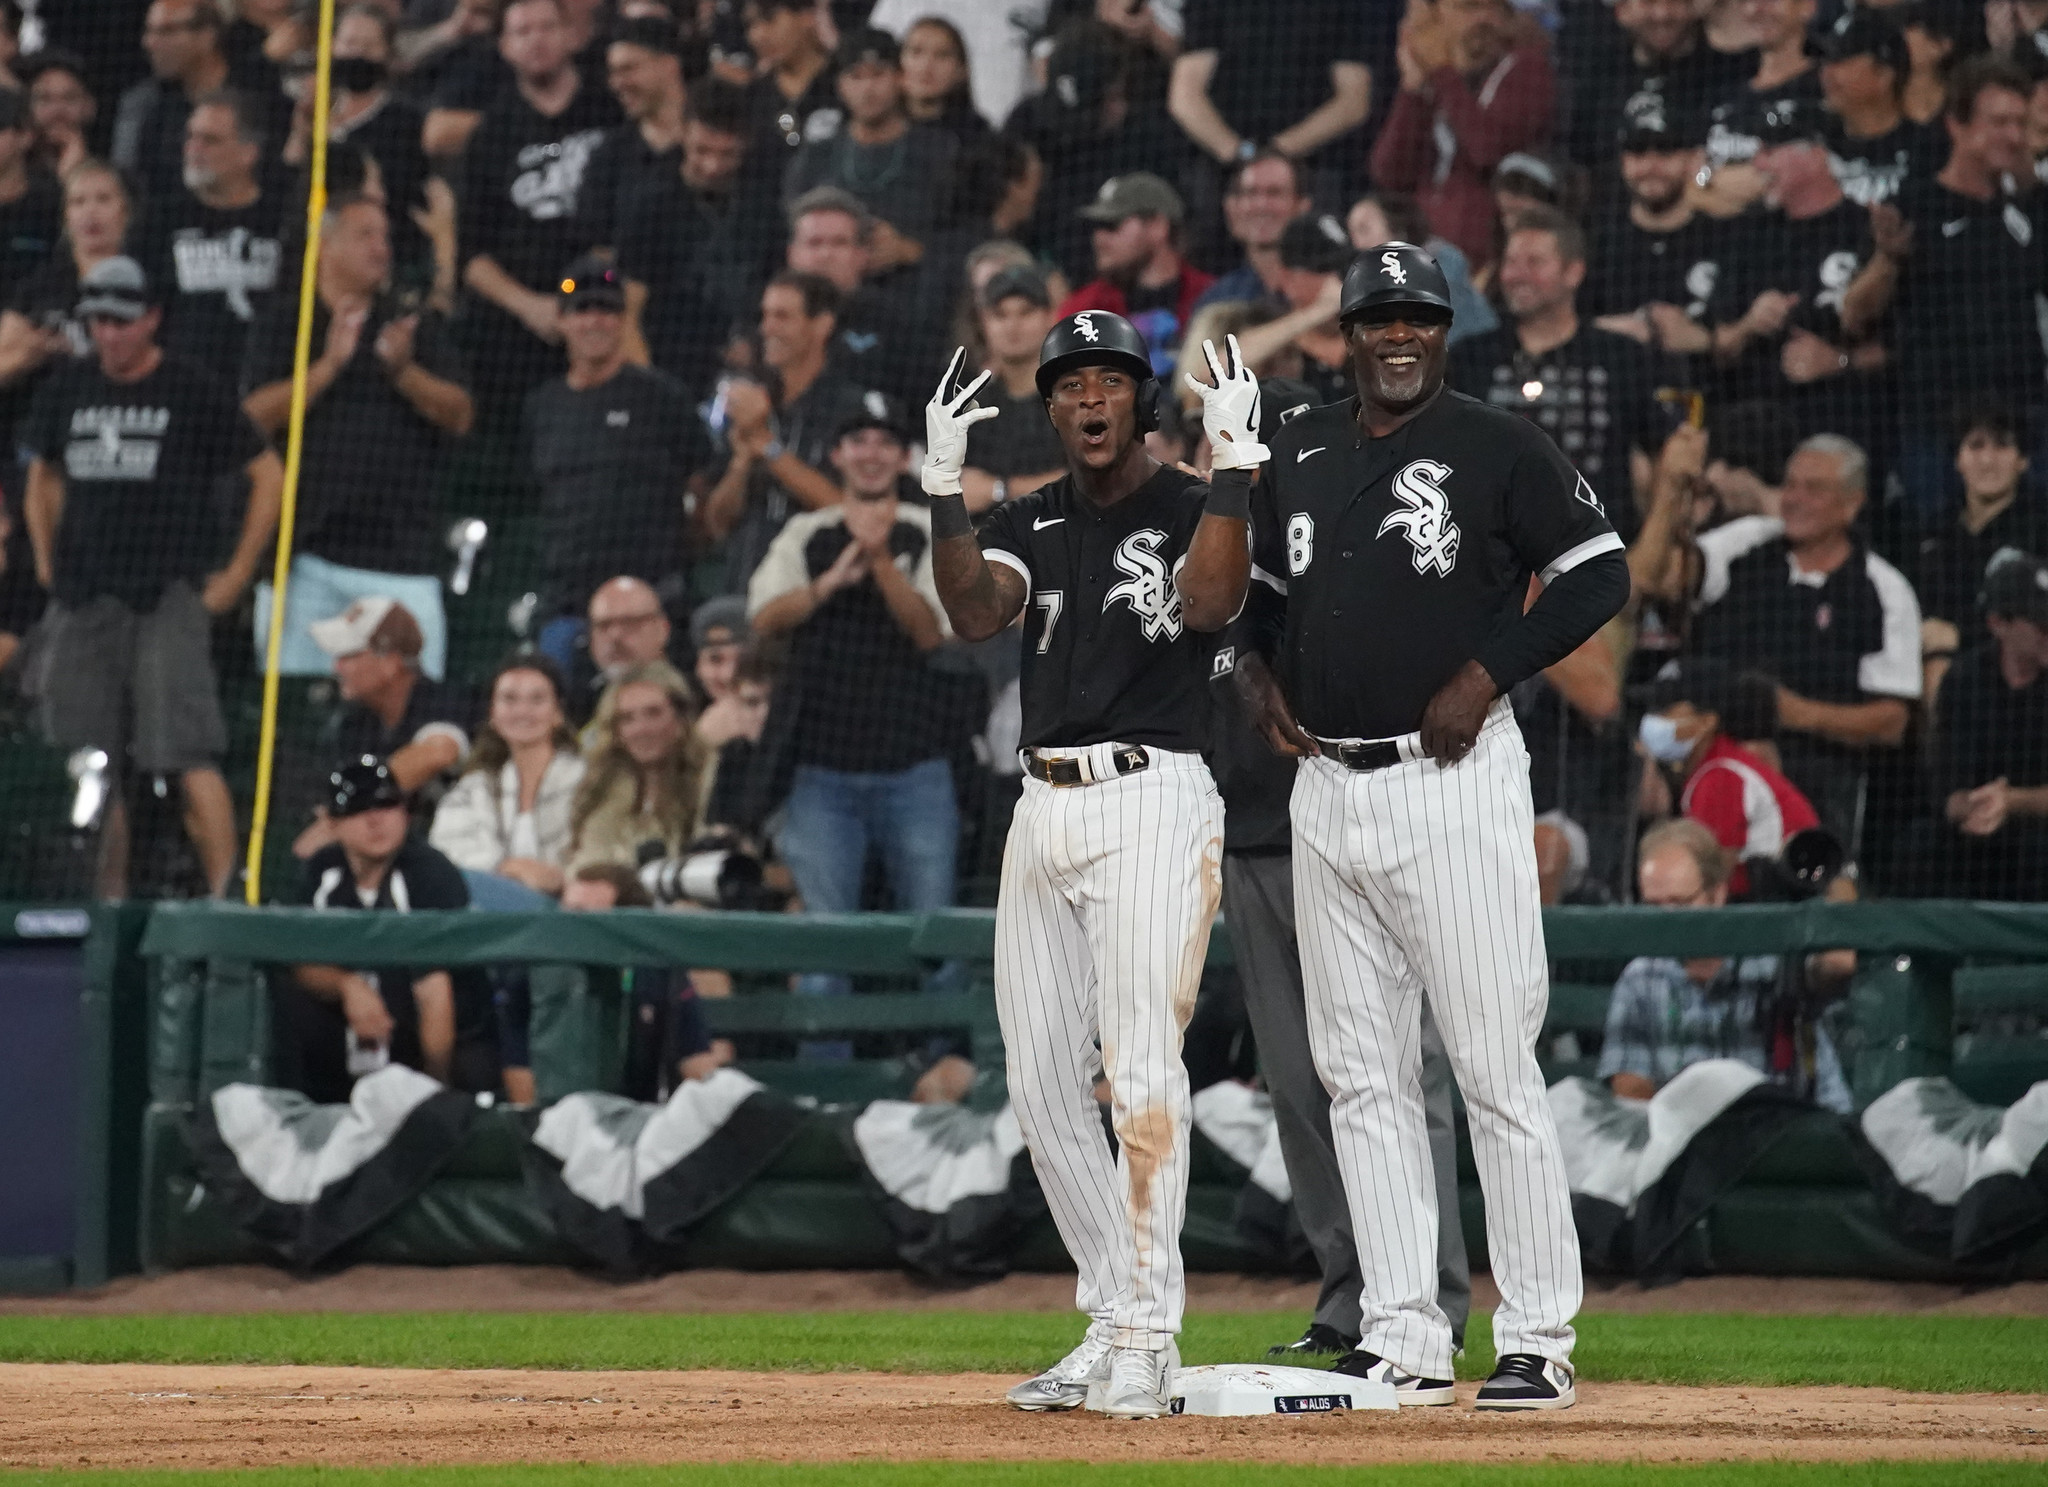 White Sox fan has attended 588 straight home games